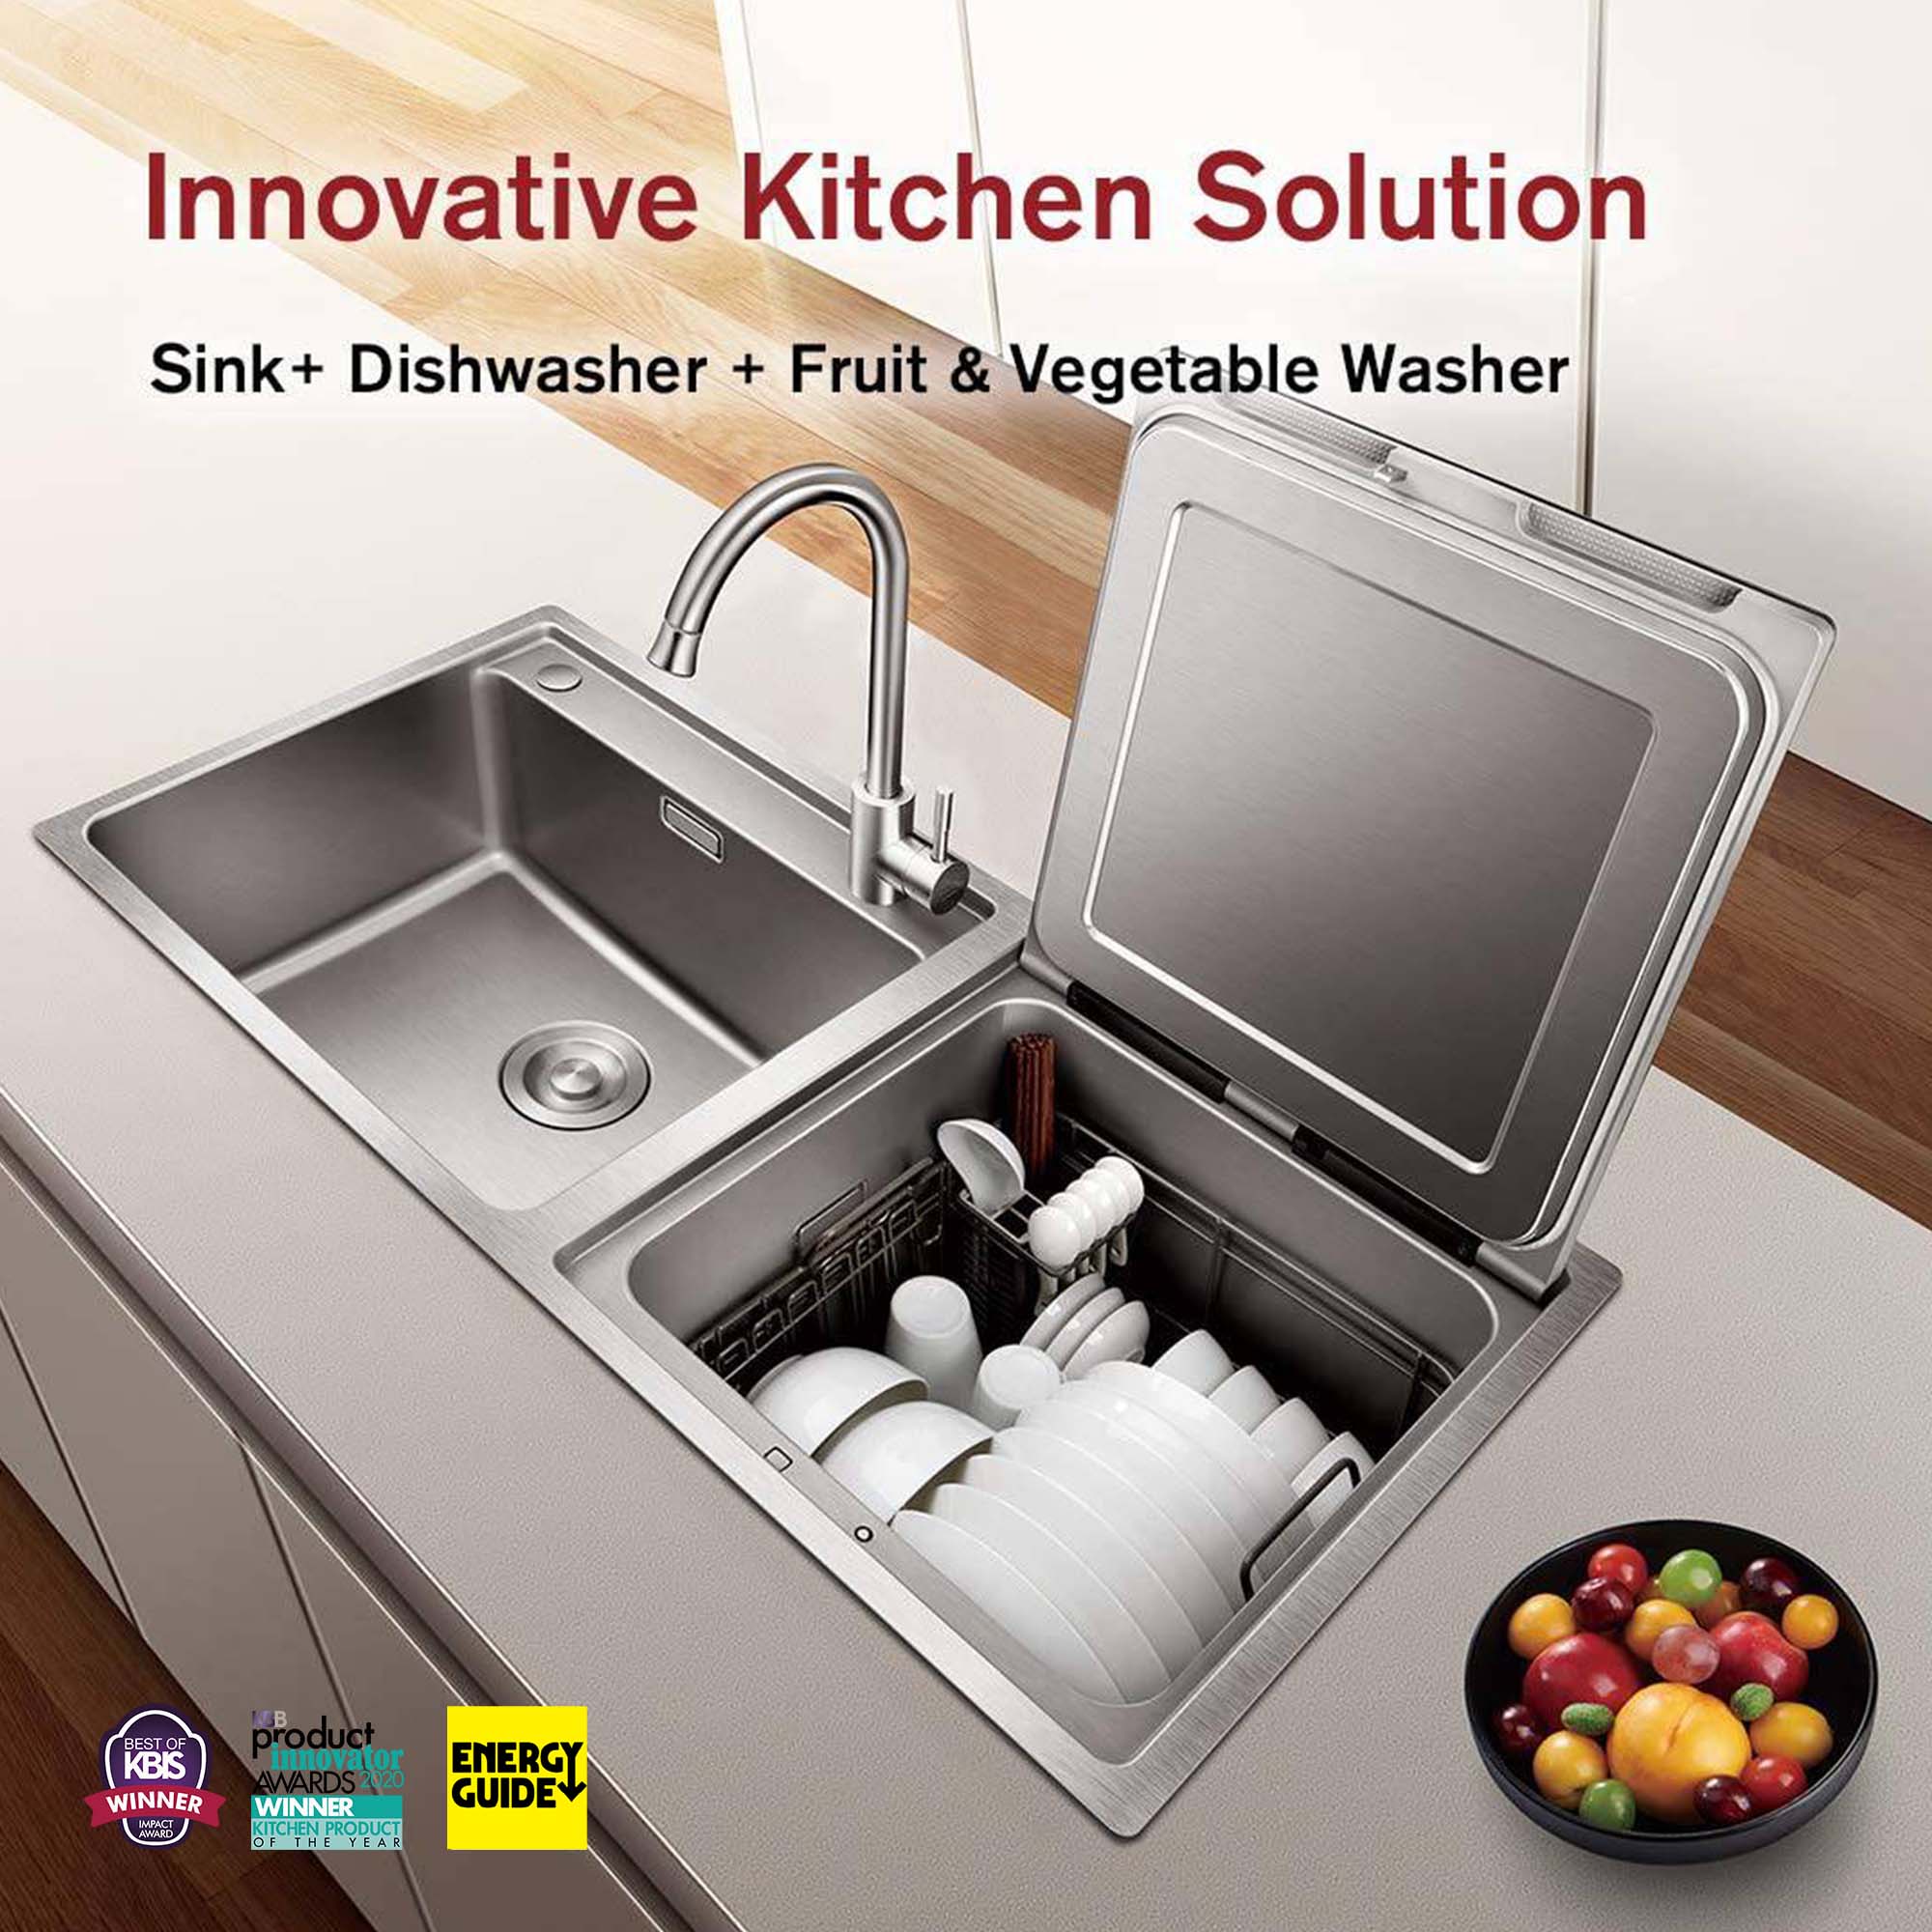 FOTILE SD2F-P1X 3-IN-1 In-Sink Dishwasher Graphic Showing Sink, Dishwasher, and Fruit & Vegetable Washer functions